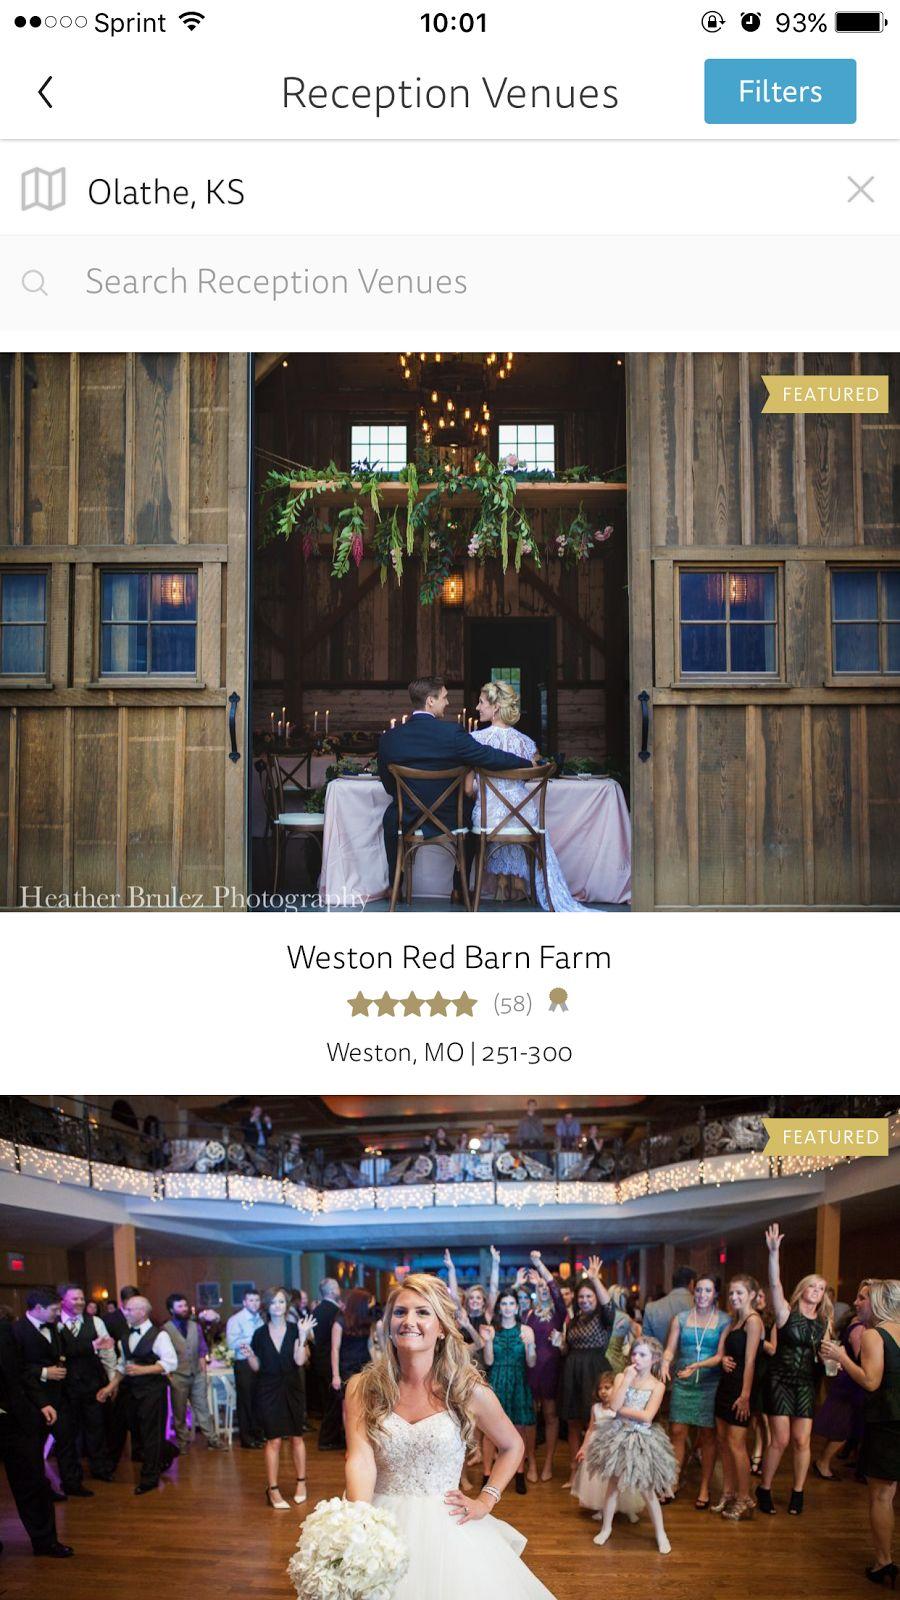 TOP RATED PRODUCTS: INSPIRATION AND PLANNING Serving more couples and their guests Personalized Inspiration ~¾ of couples planning a wedding are on our platform* Planning Tools #1 Wedding app; 1M